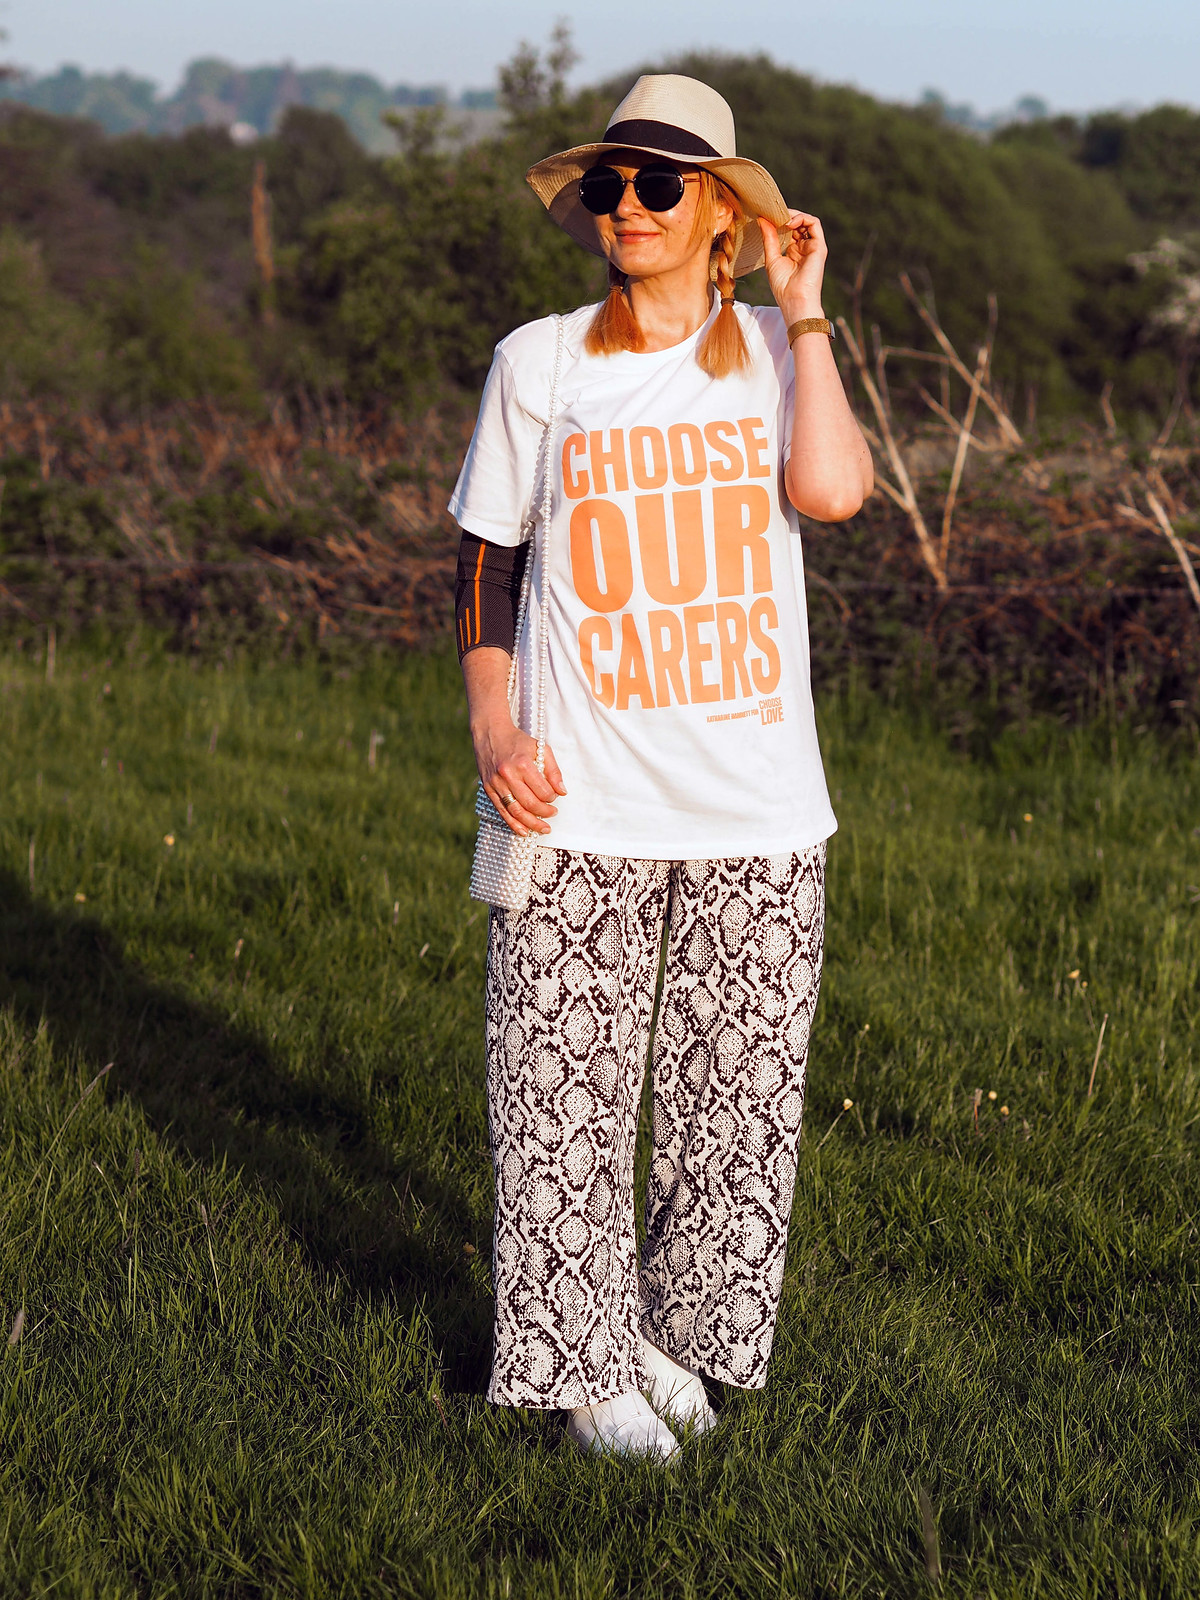 Styling the Charity 'Choose Our Carers' T-Shirt (With snake print wide leg pants and a straw hat) | Not Dressed As Lamb, over 40 style